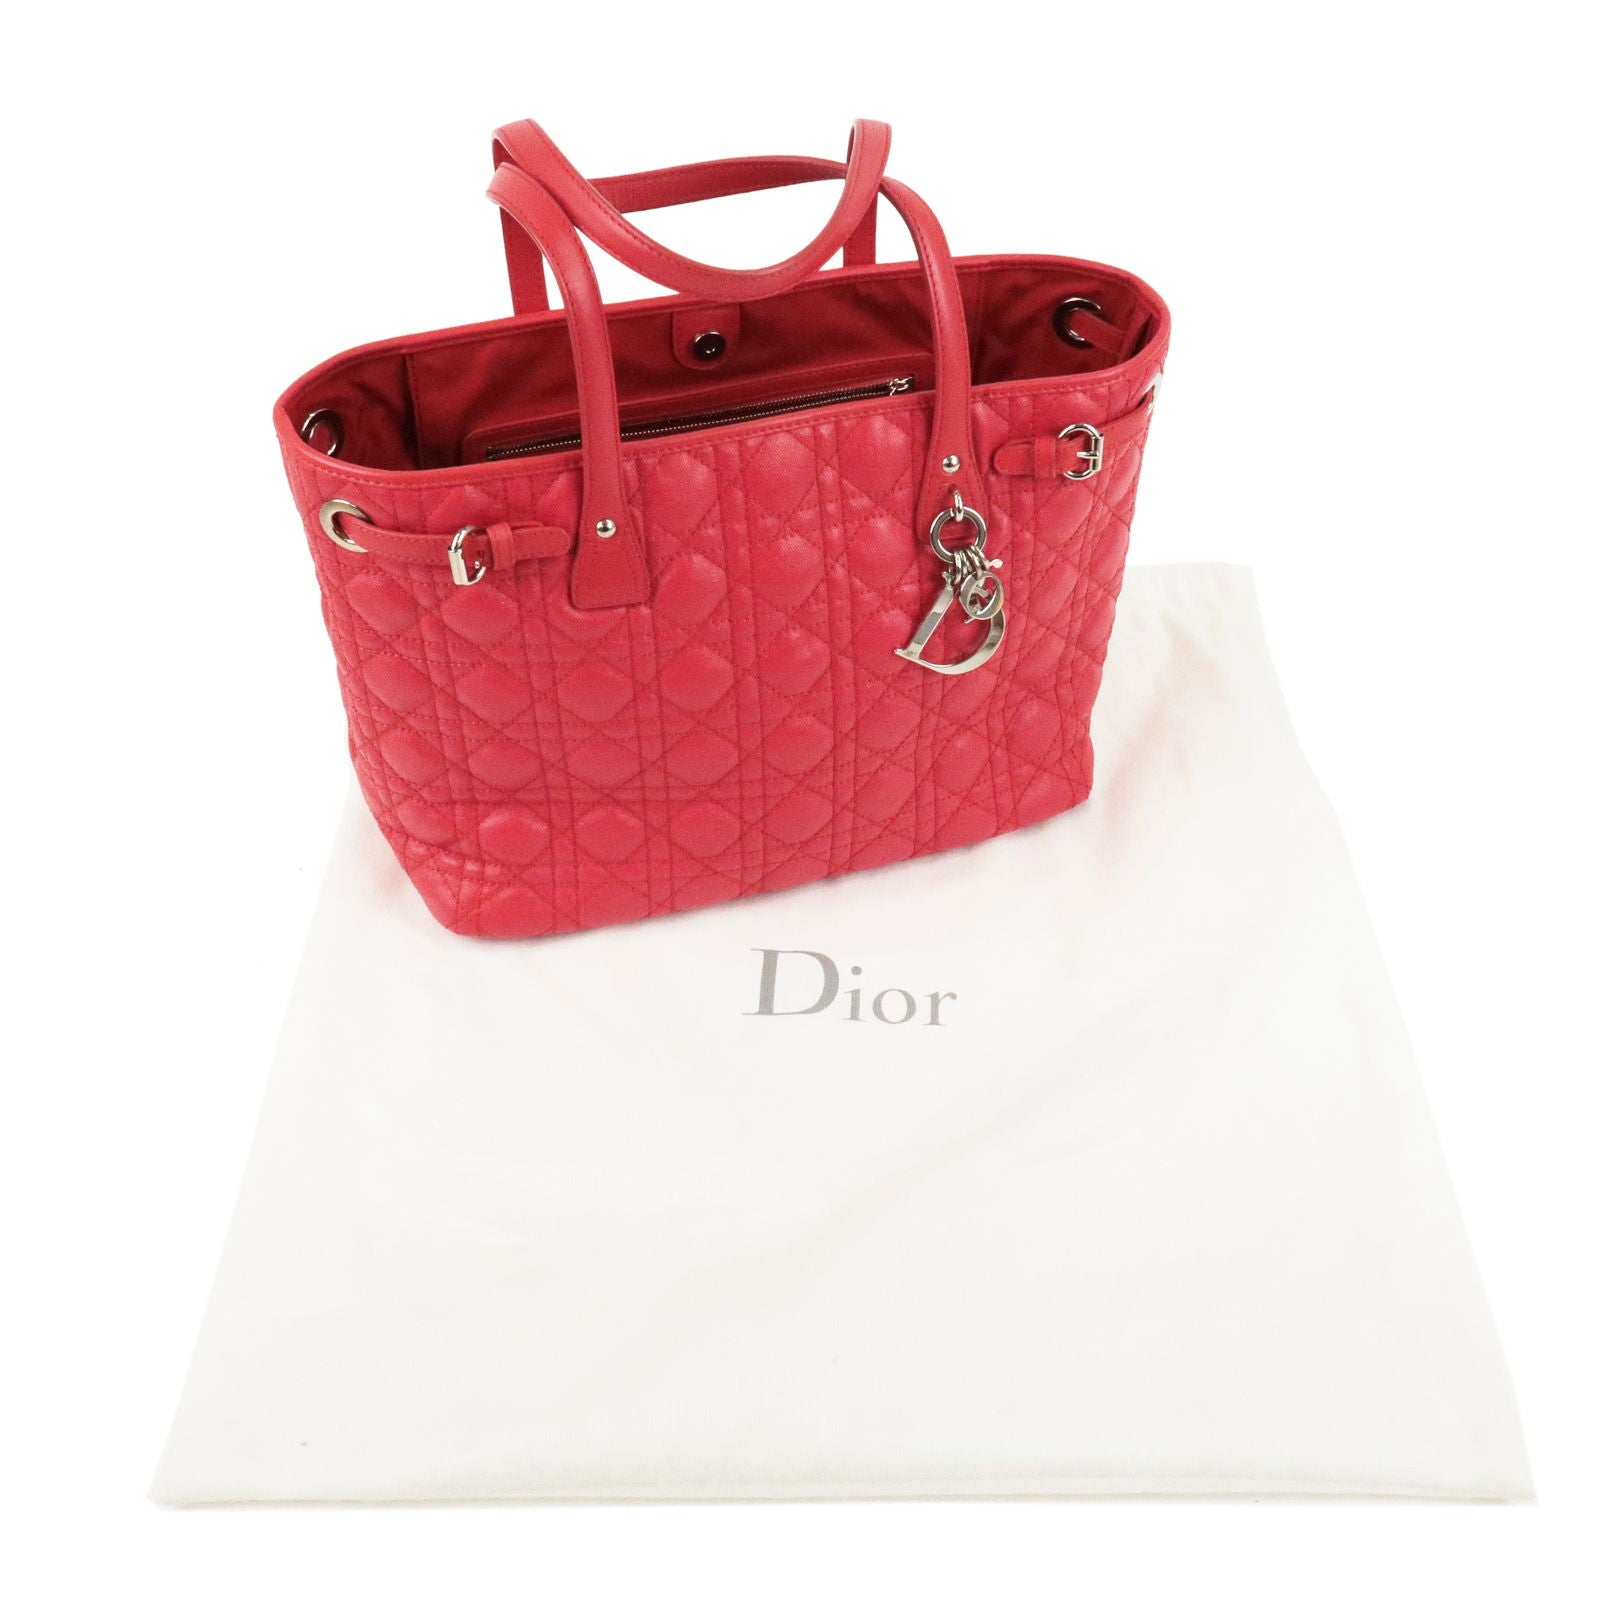 Dior, Bags, Dior Charm Spell Out Pochette Bag